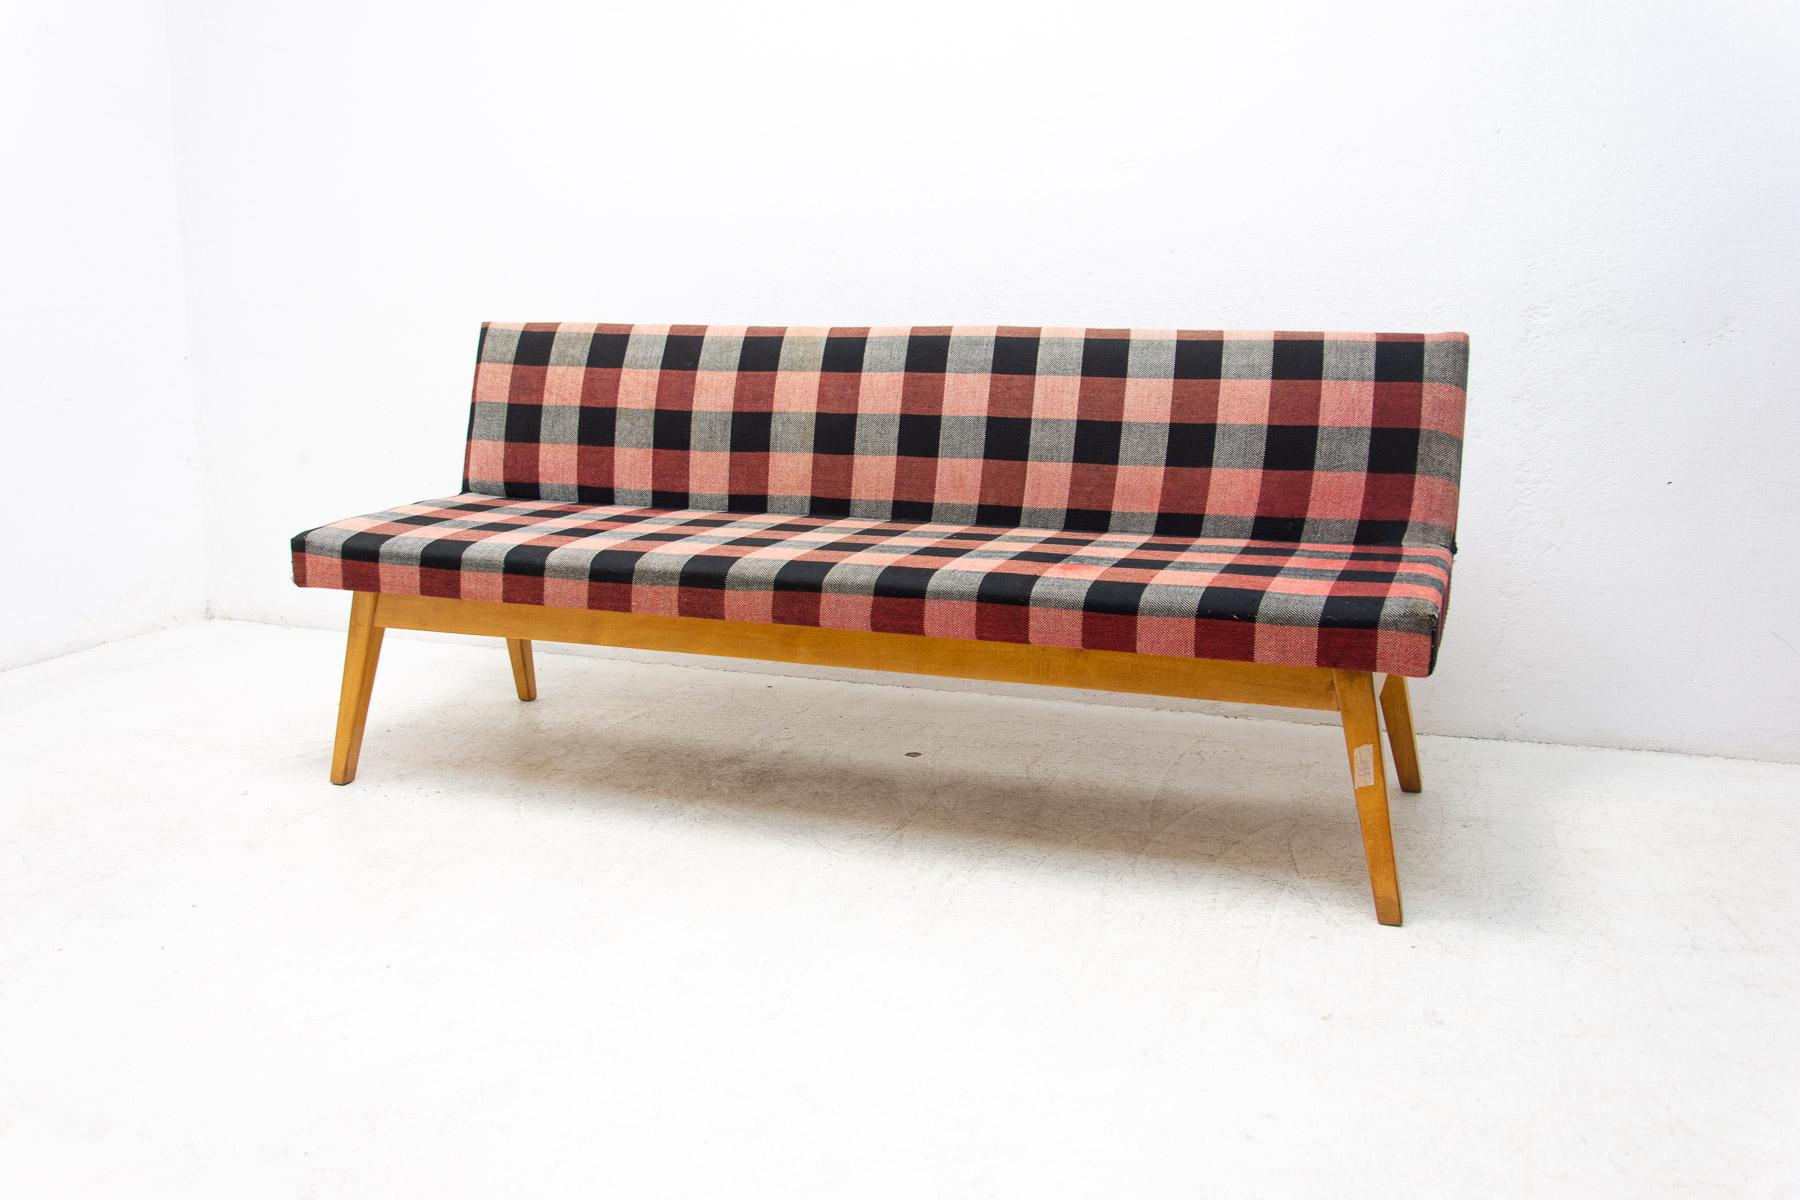 Midcentury sofa/daybed, made in the former Czechoslovakia in the 1960s, designed by Miroslav Navrátil. Material: beechwood, fabric. The sofa is in well preserved Vintage condition, showing slight signs of age and using.

Measures : Height: 76